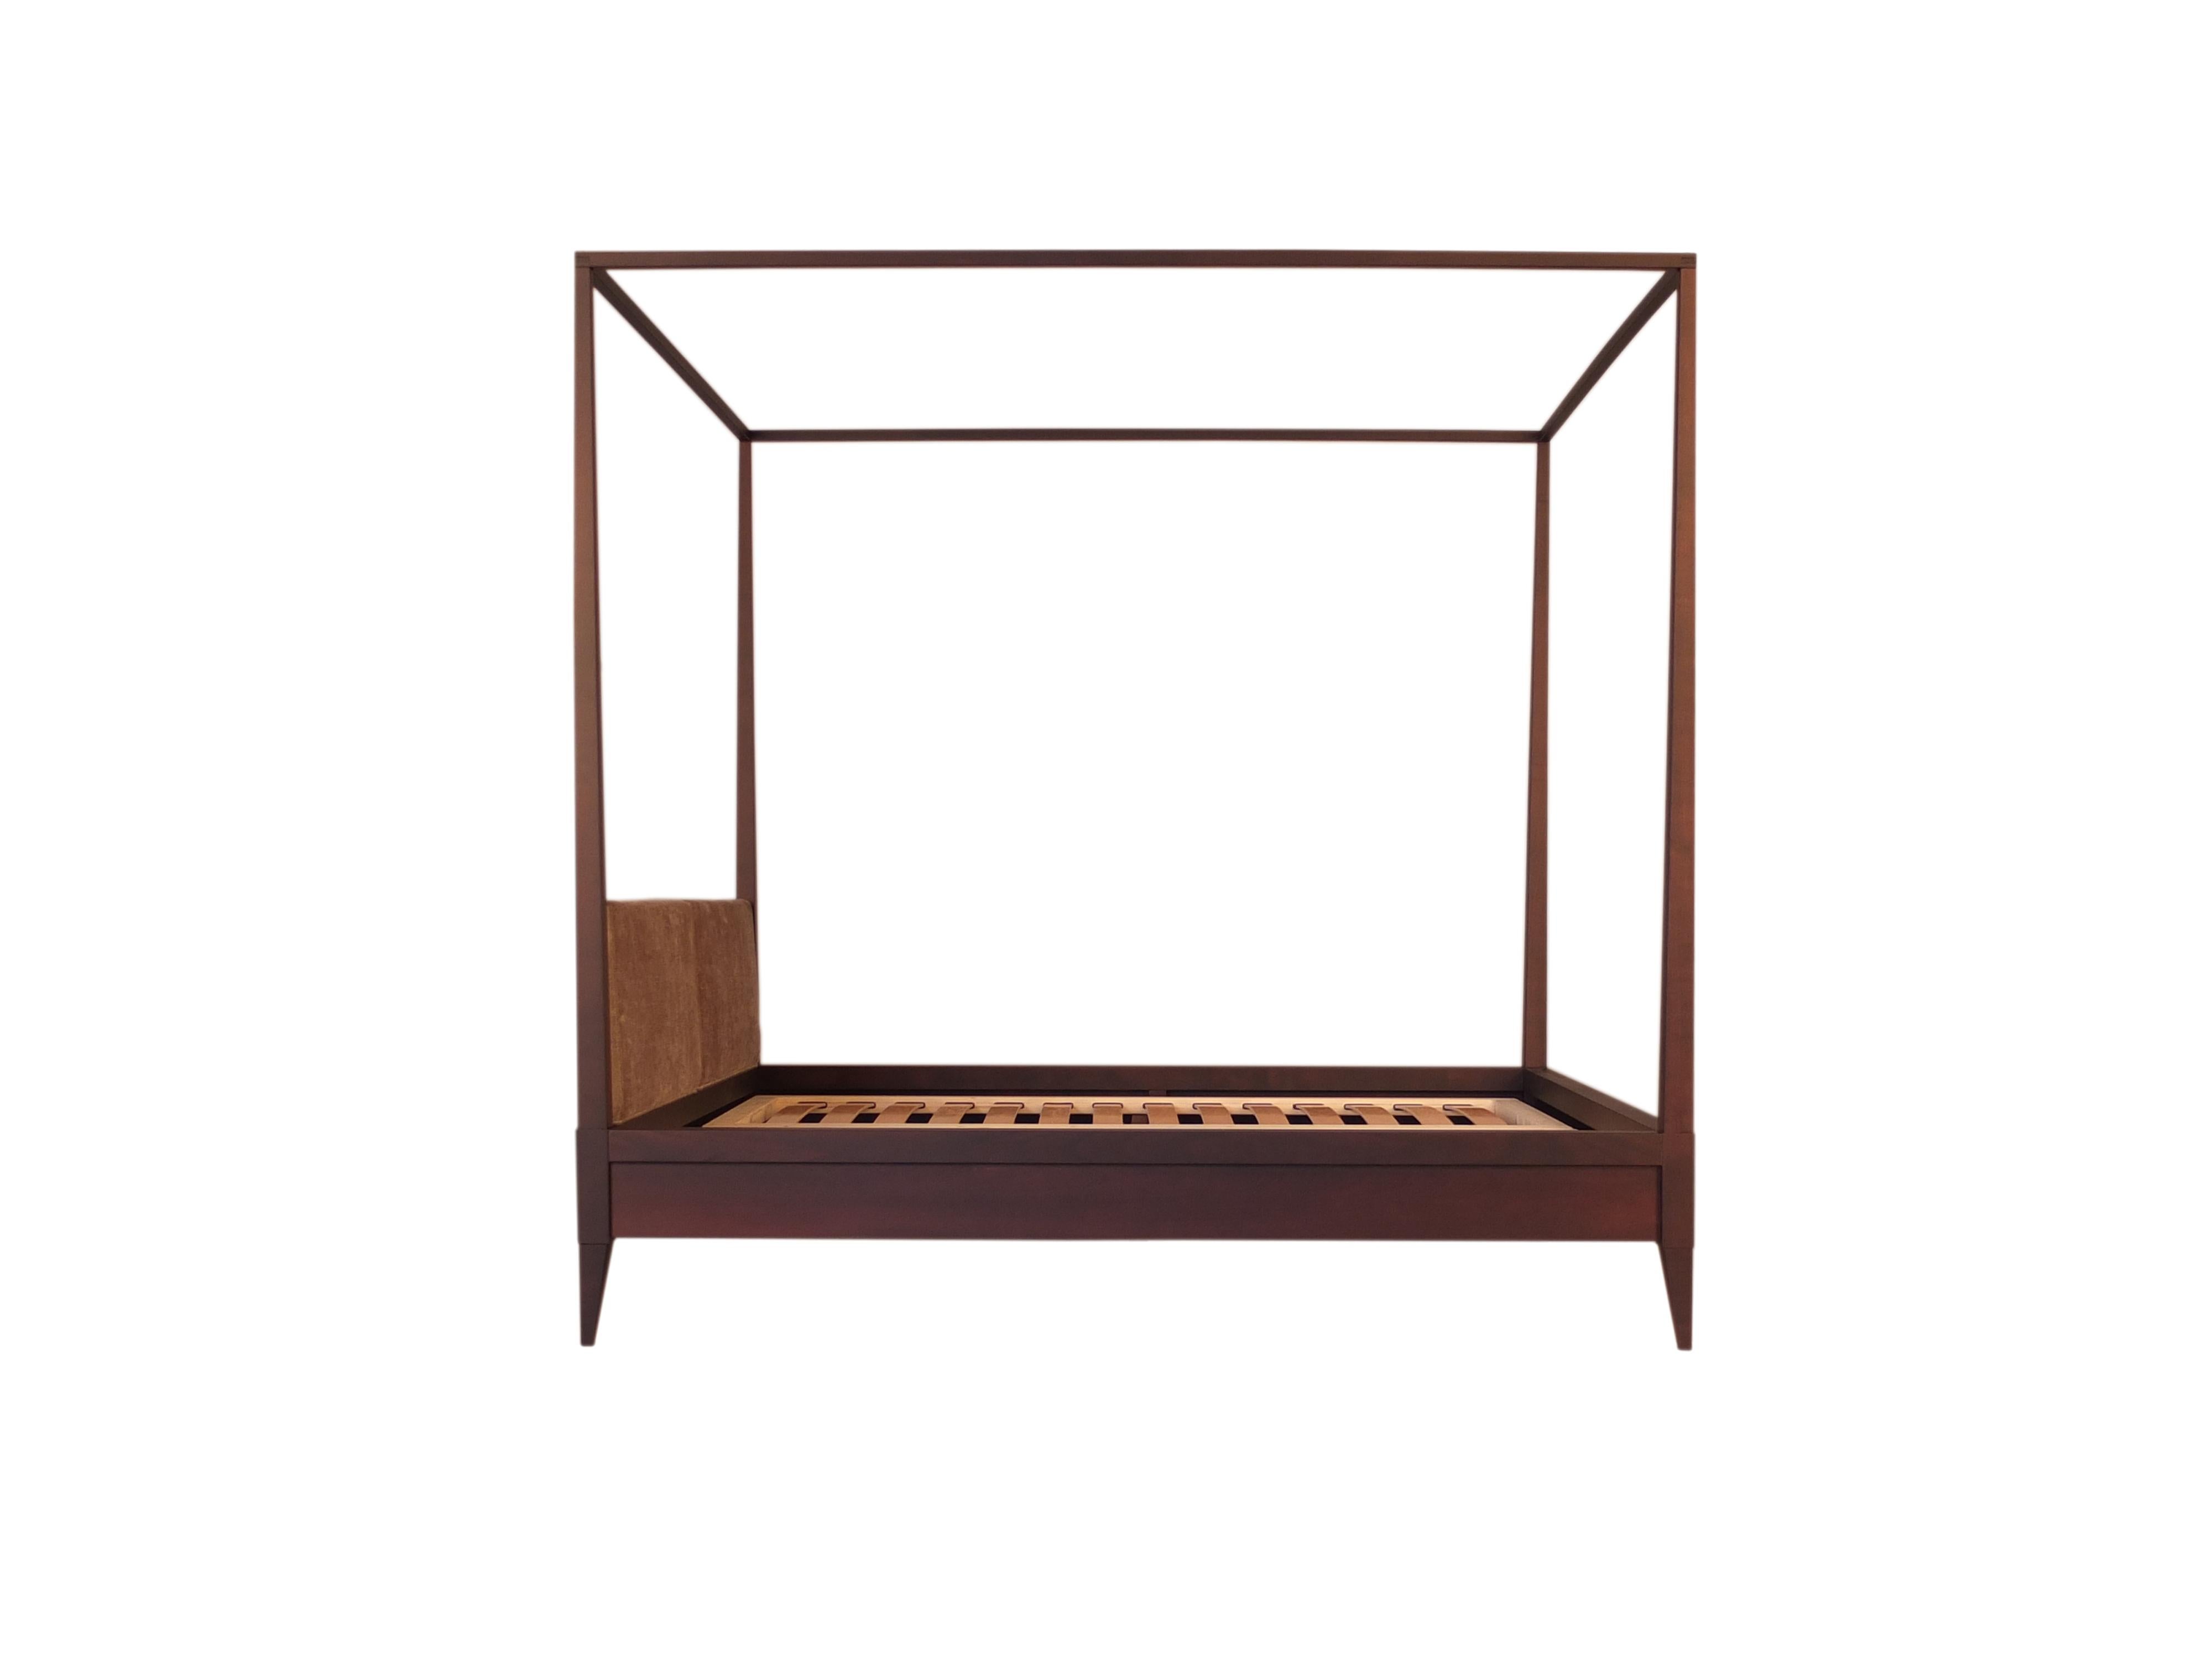 Leather Valentino Canopy Bed Made of Cherrywood with Upholstered Headboard, by Morelato